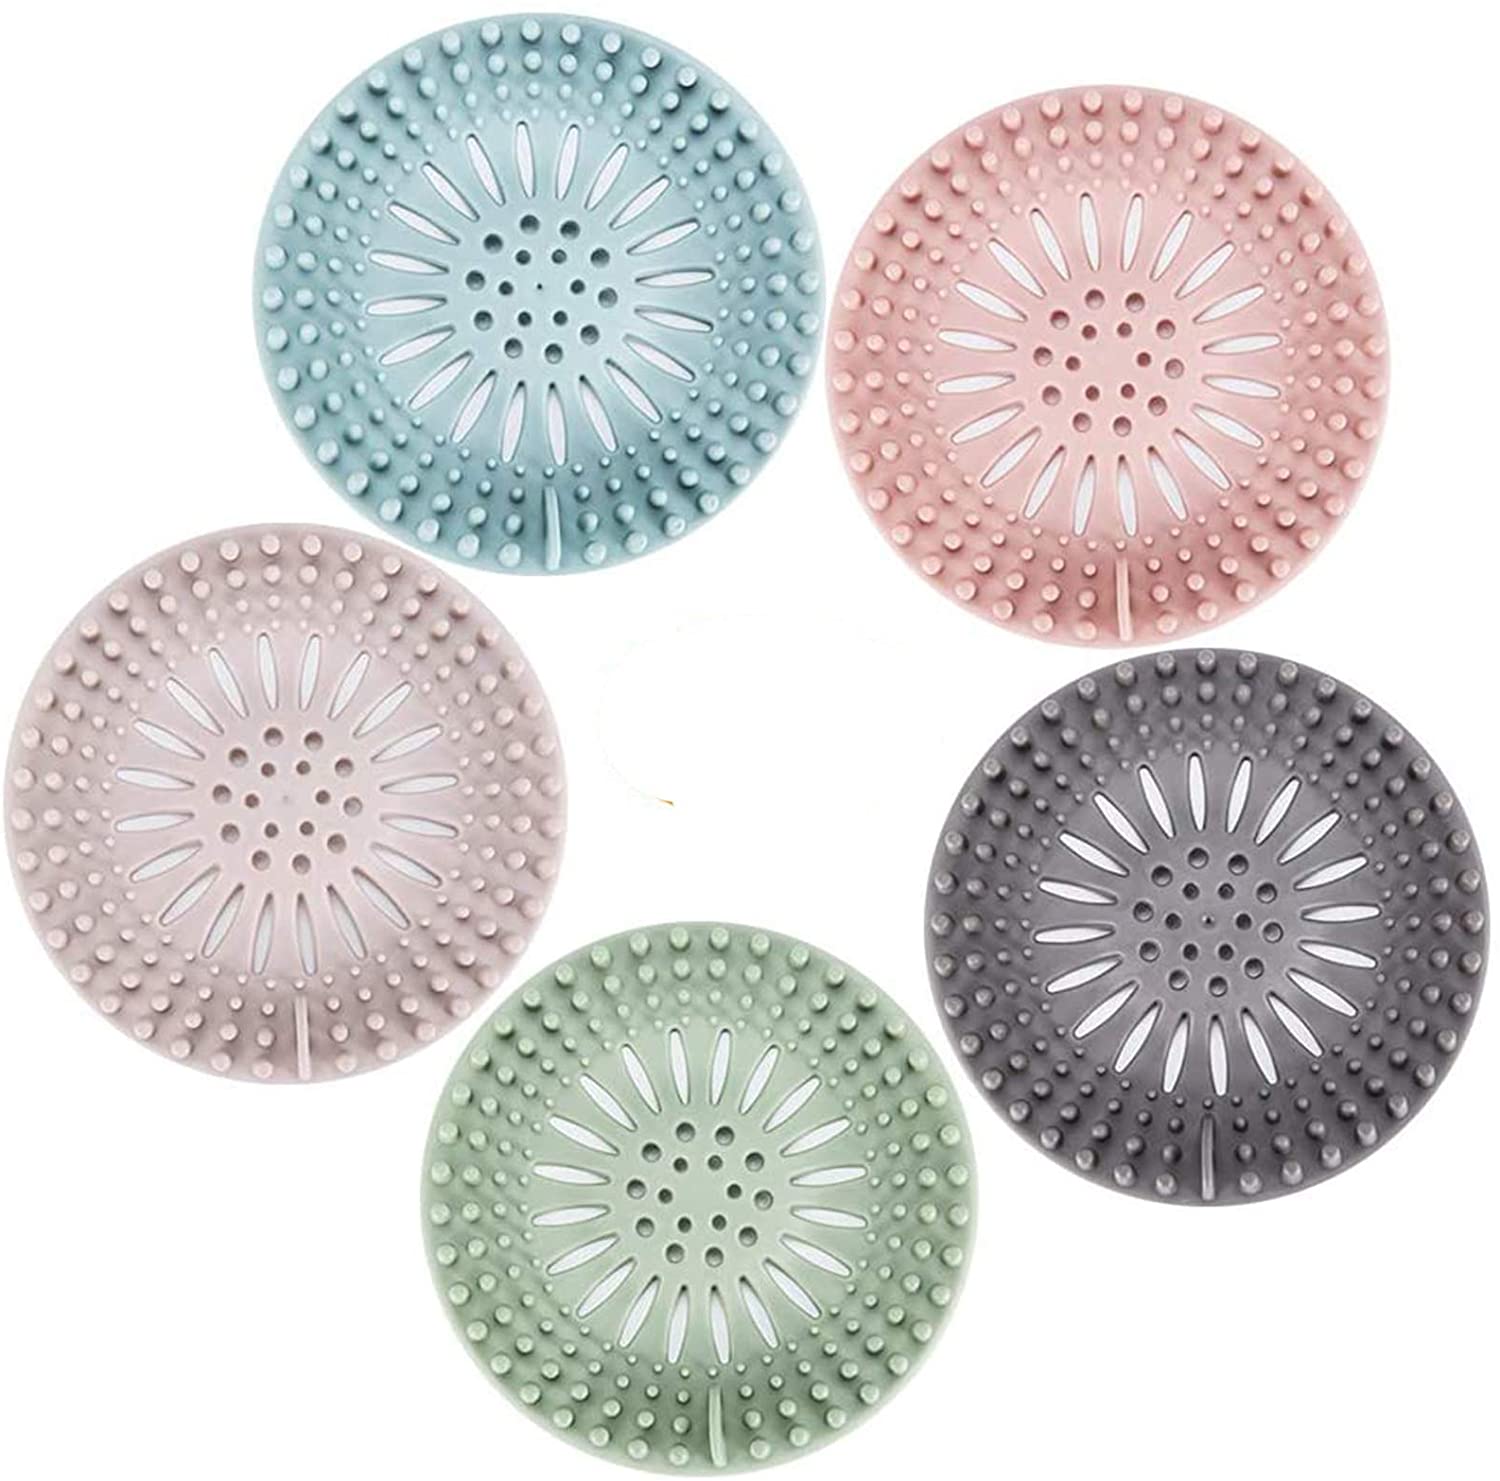 Hair Catcher Durable Silicone Hair Stopper Shower Drain Covers Easy to Install and Clean Suit for Bathroom Bathtub and Kitchen 5 Pack